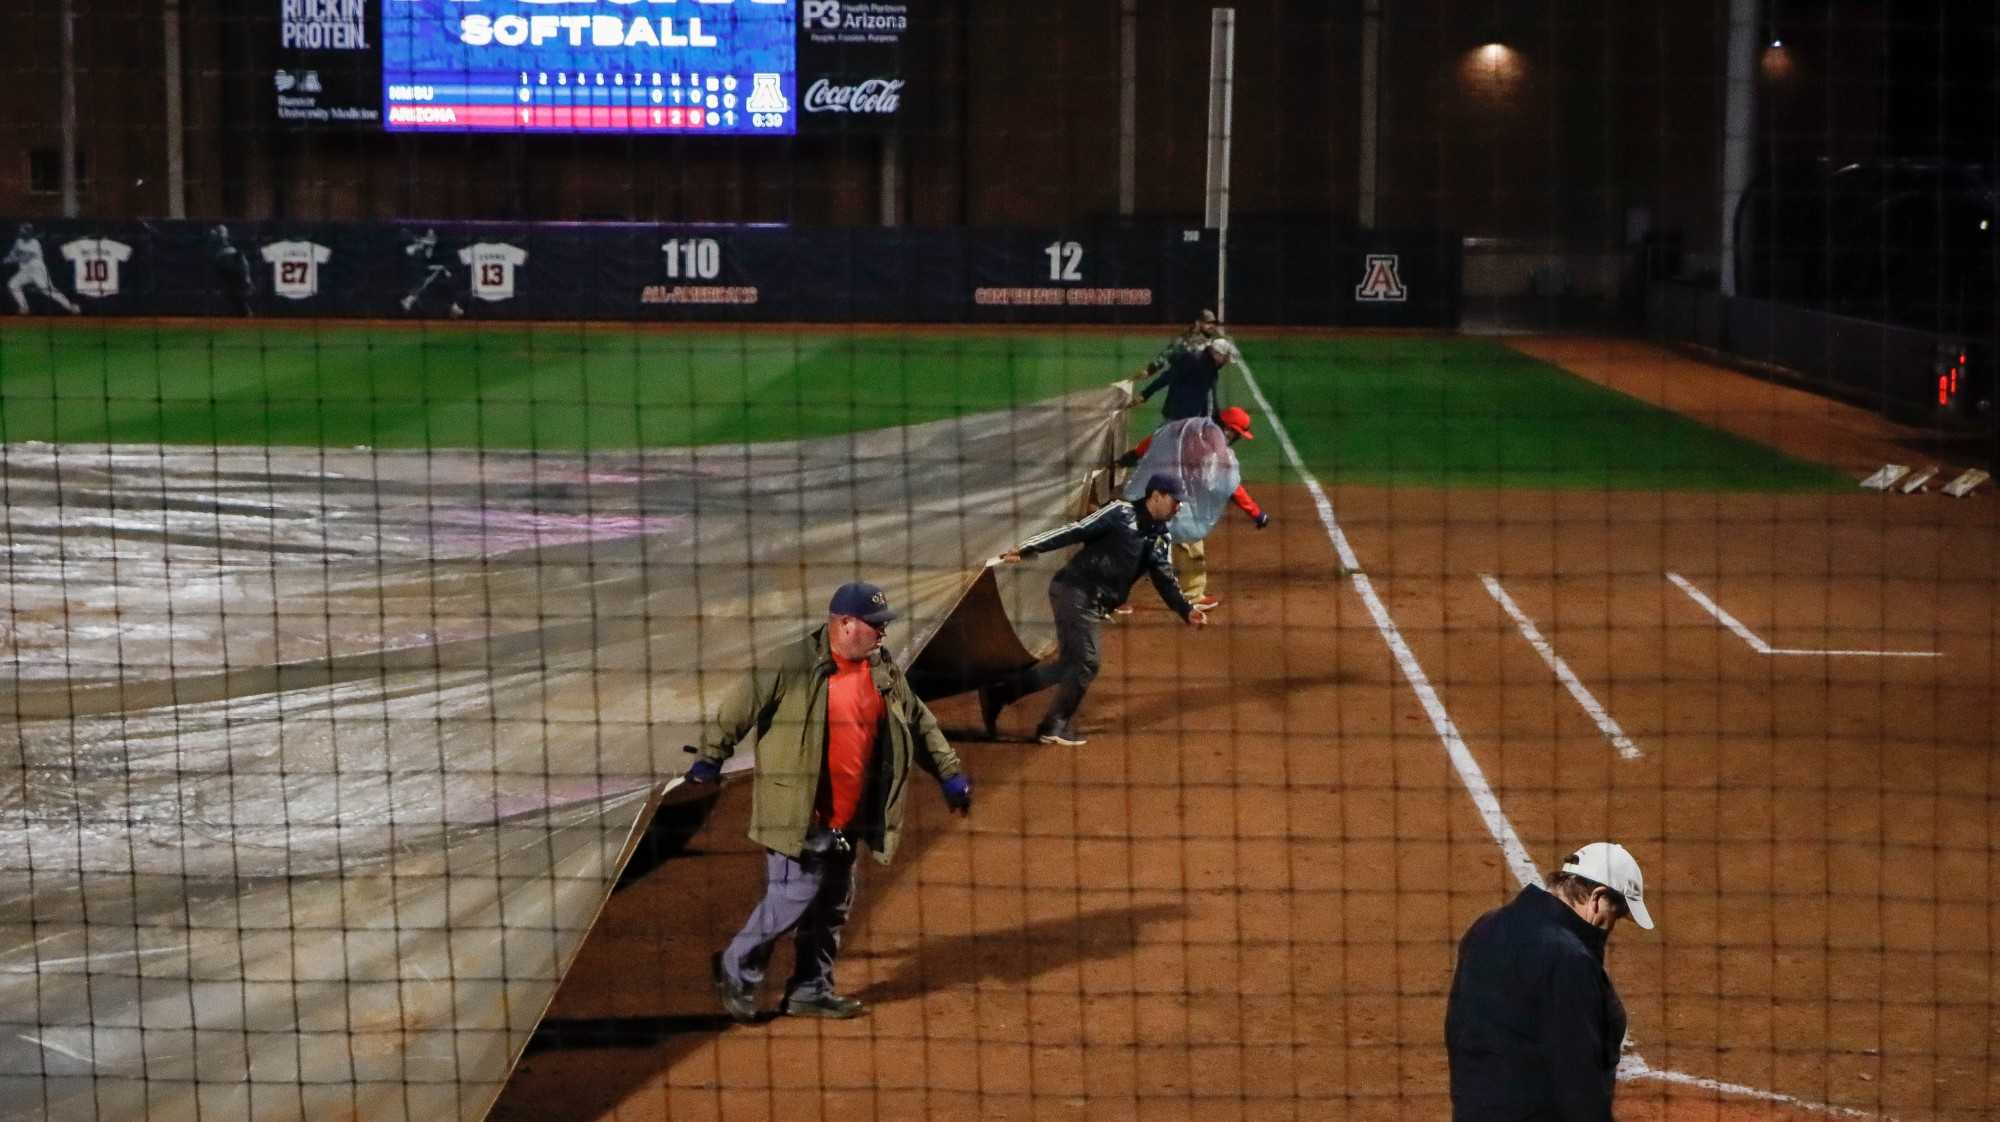 Arizona softball grounds crew covers the field during a rain delay in Rita Hillenbrand Memorial Stadium on March 15. The rain delay lasted approximately 30 minutes until the Umpires deemed it safe to resume play.  